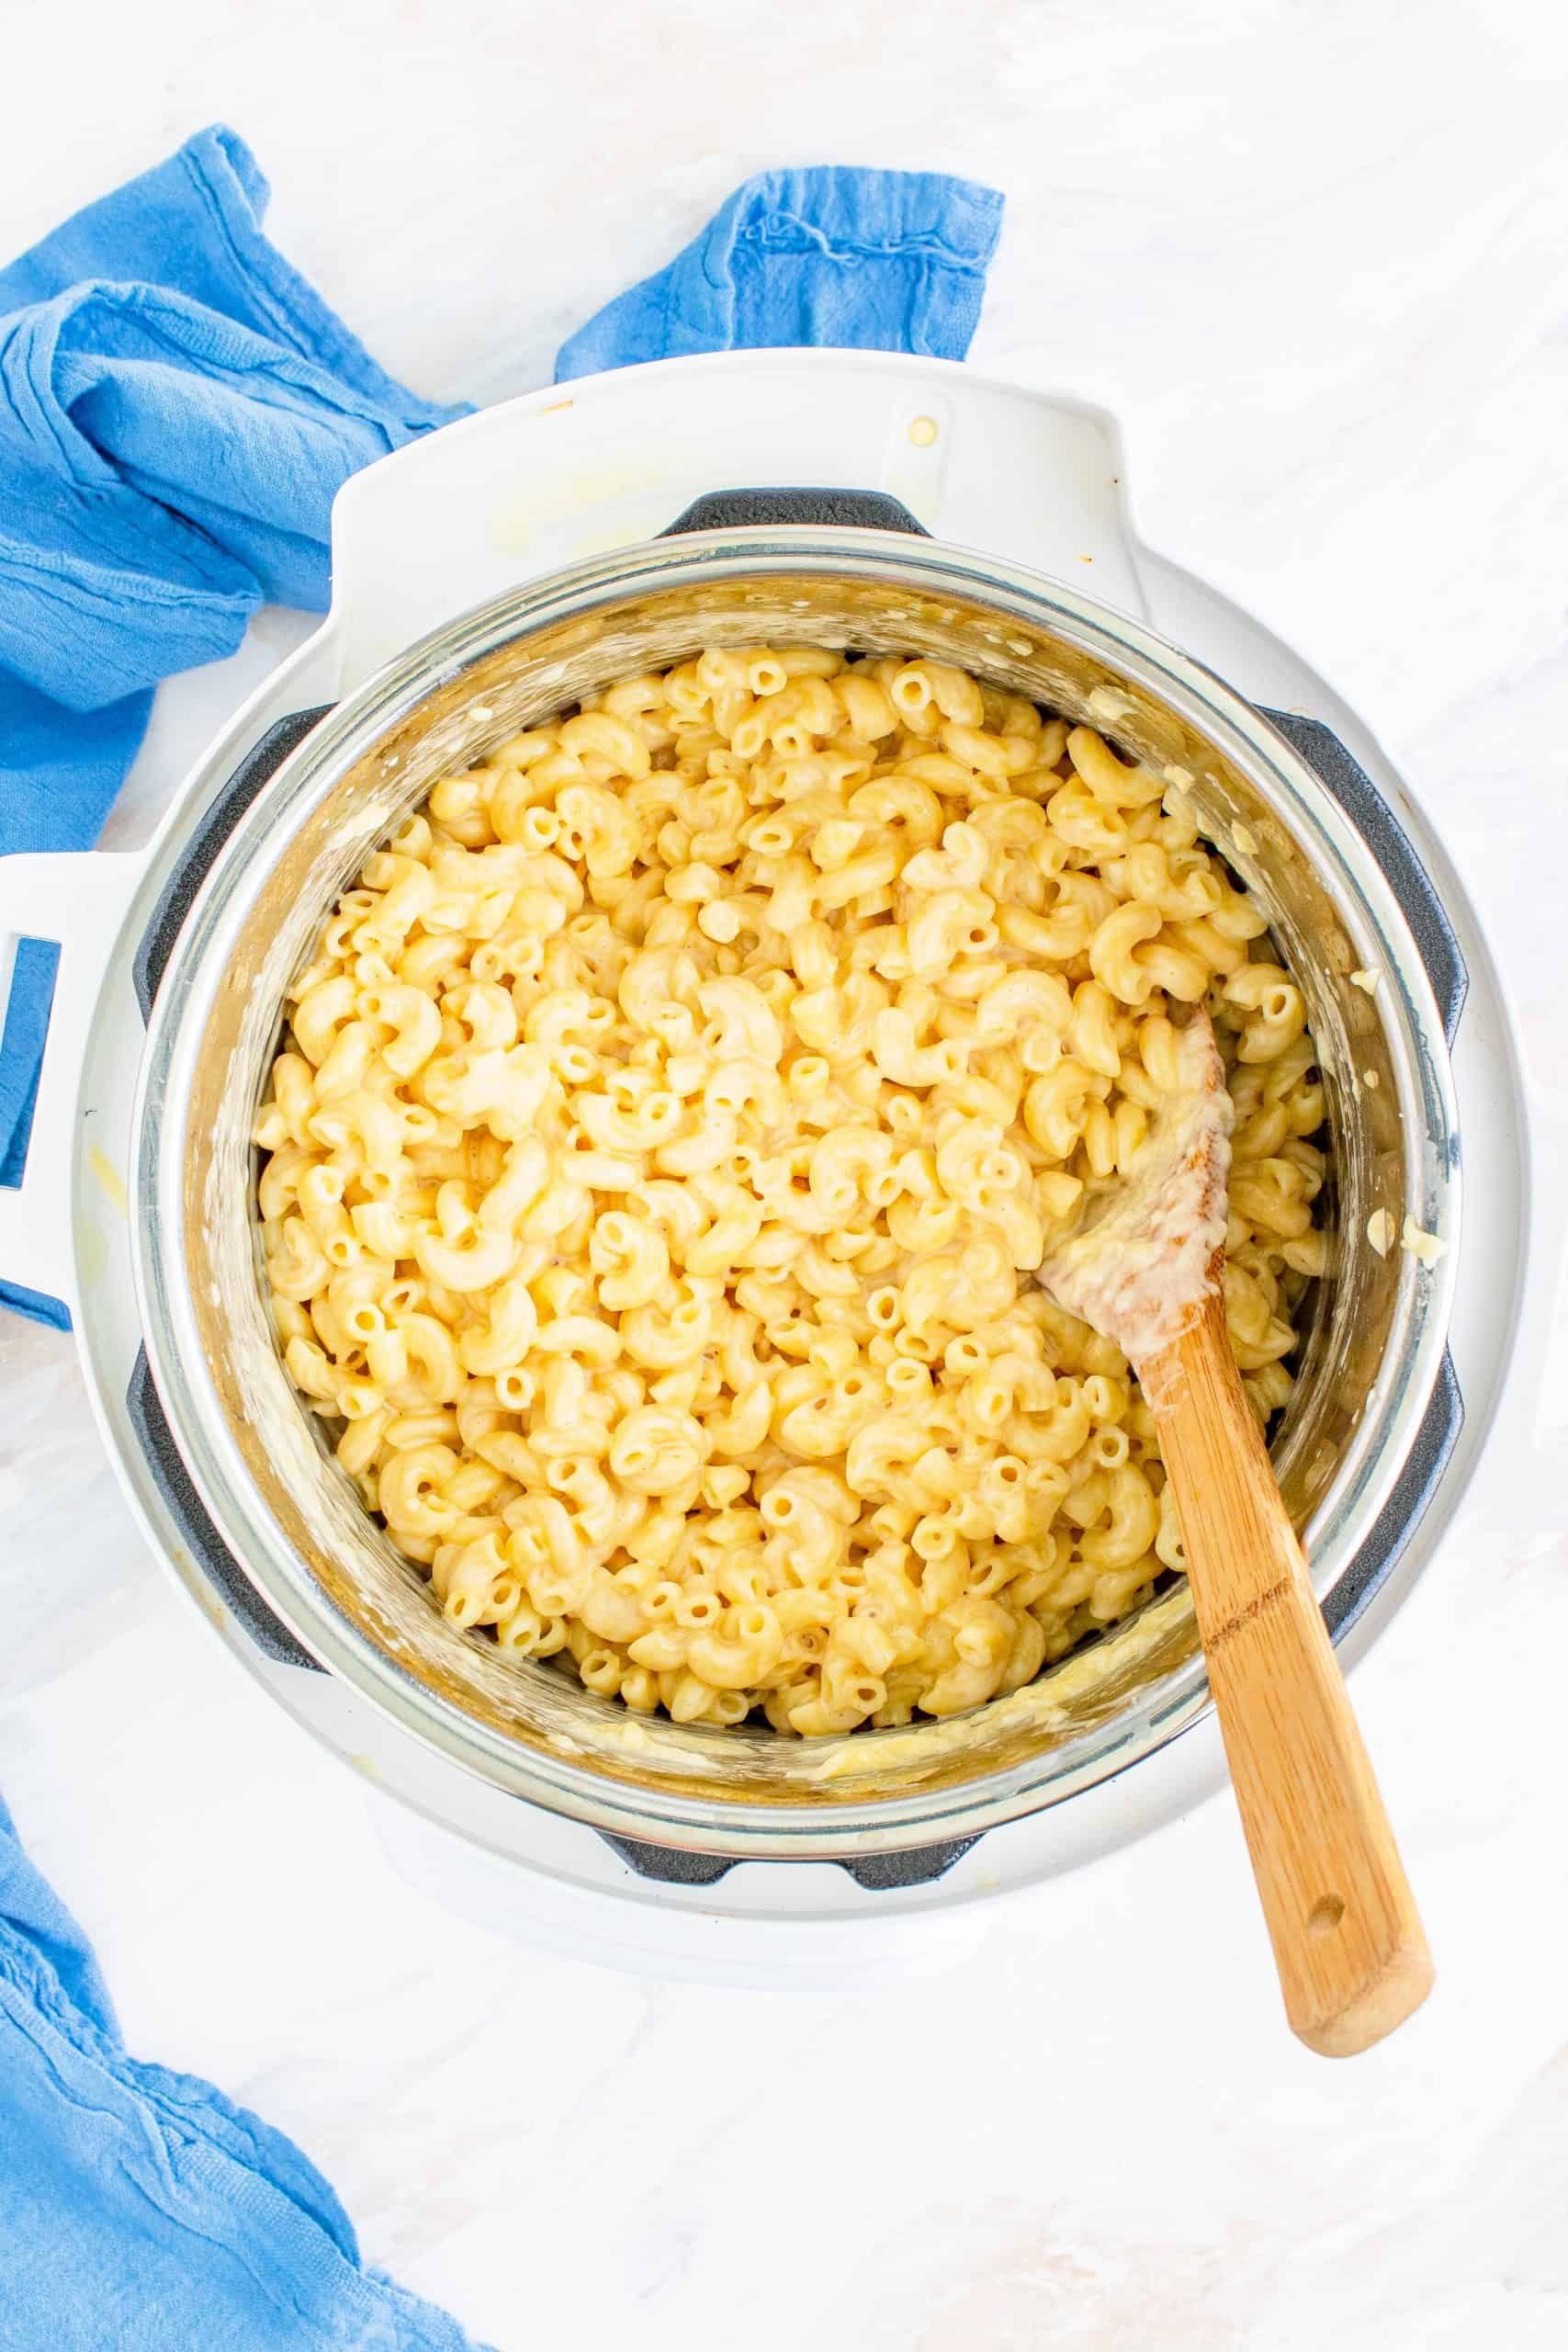 milk, cheese and macaroni noodles stirred together in an Instant Pot.